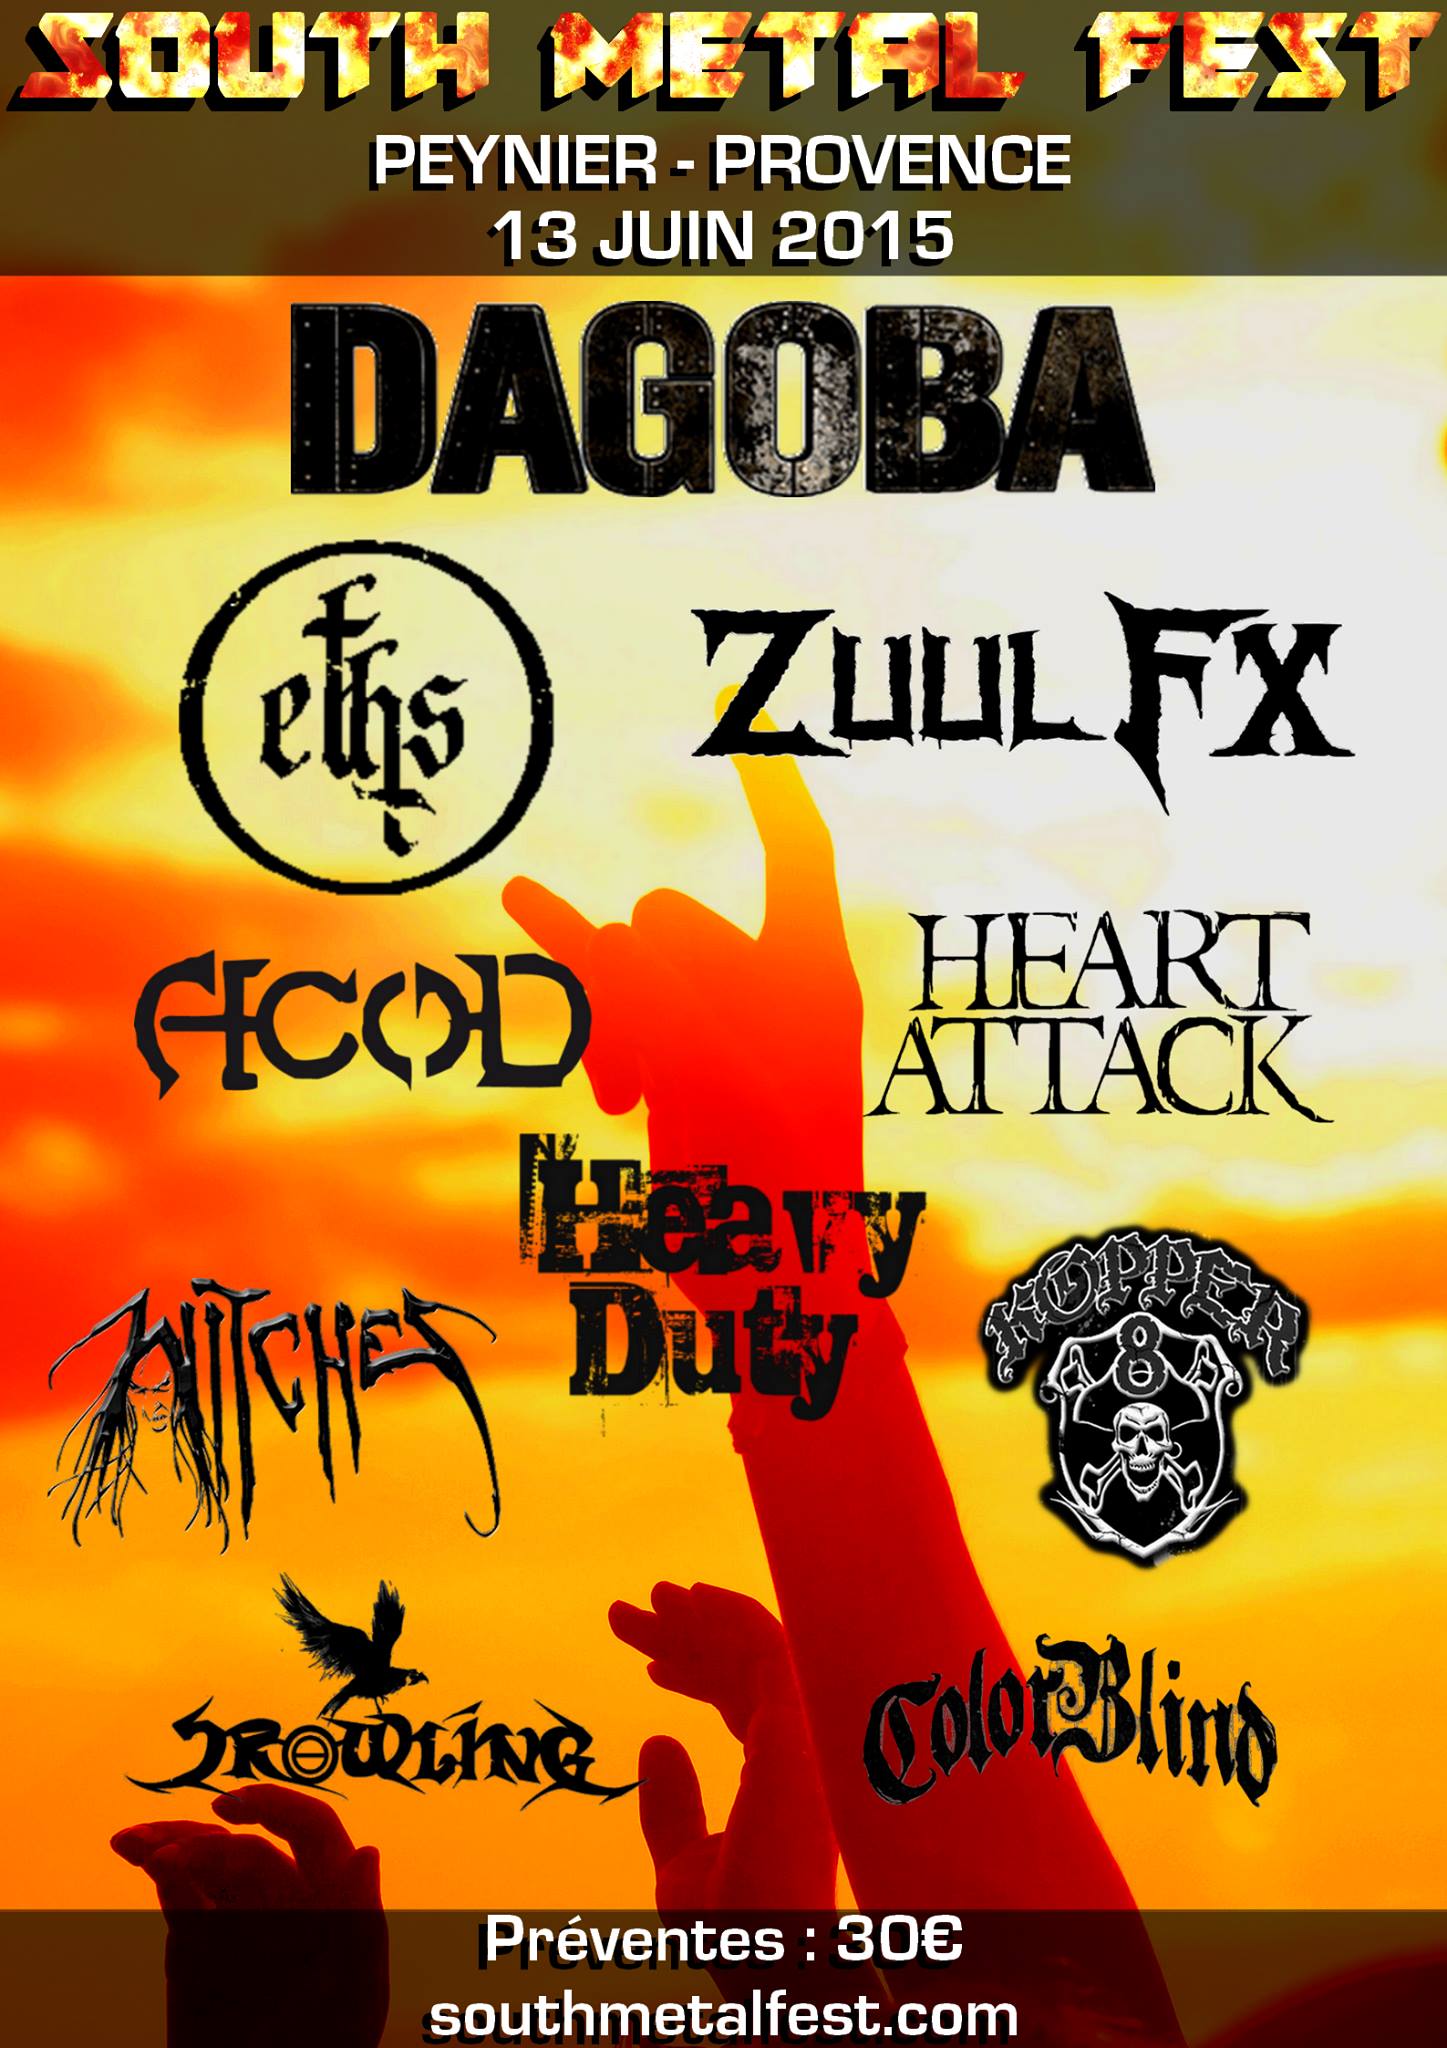 Witches flyer Dagoba + Eths + Zuul FX + A.c.o.D.+ Heavy Duty + Heart Attack + Kopper 8 + WITCHES + Crowling + Colorblind @  South Metal Fest Peynier (13-France)